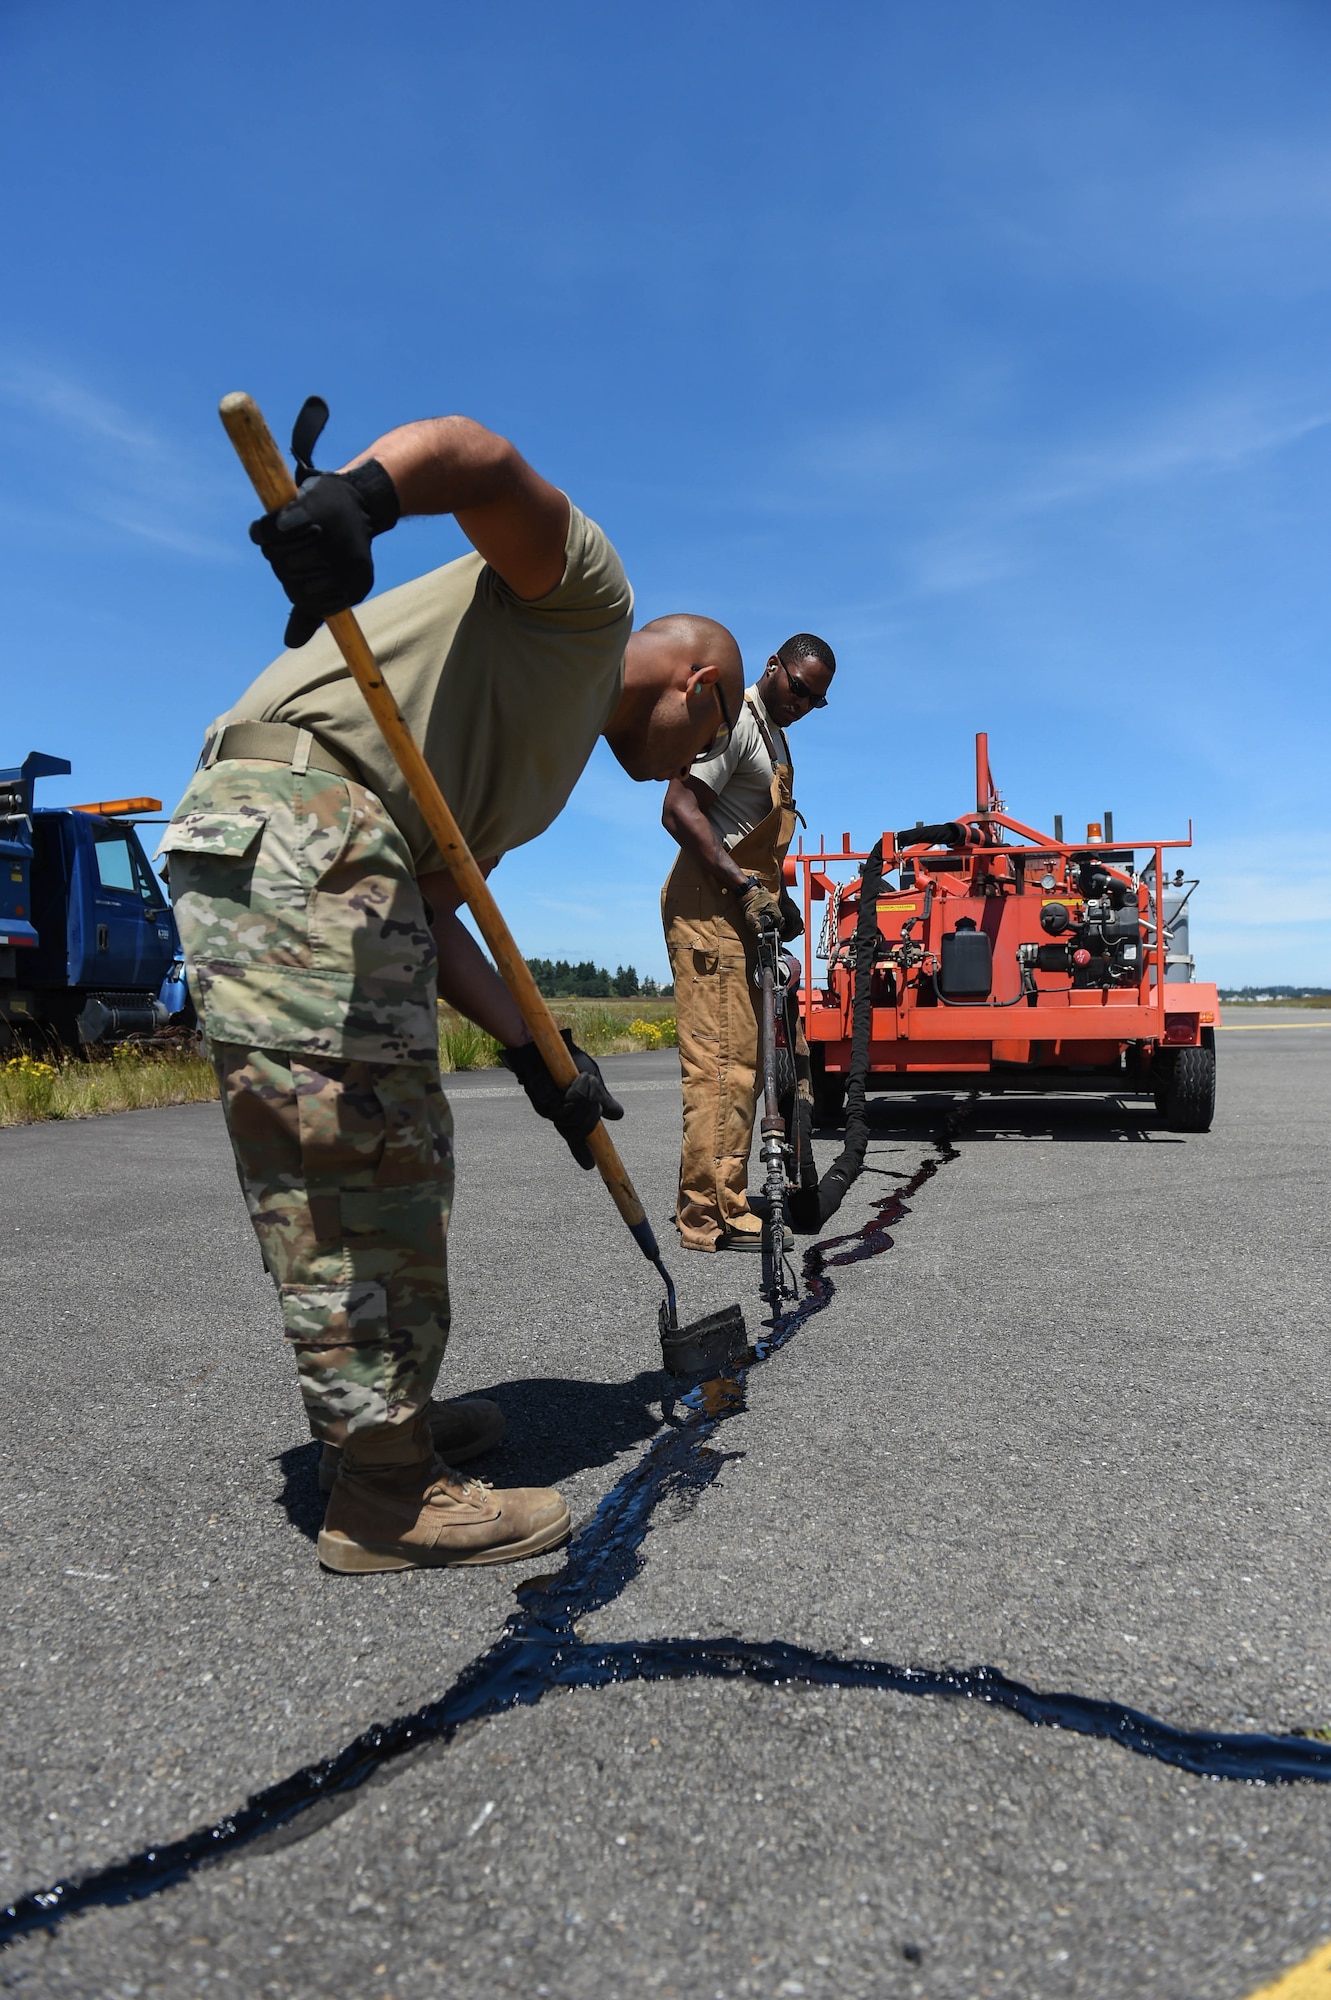 Airman 1st Class Felipe Reyes-Cedeno, left, and Senior Airman Irvin Matthews, right, 627th Civil Engineer Squadron pavements and construction equipment technicians work together to reseal a crack in the McChord Field flight line on Joint Base Lewis-McChord, Wash., June 25, 2020. In a three-person resealing team, one person drives the truck moving the tar kettle around, while another operates the tar dispensing handle, and the last person follows them with a squeegee making sure the tar is level with the asphalt. (U.S. Air Force photo by Airman 1st Class Mikayla Heineck)